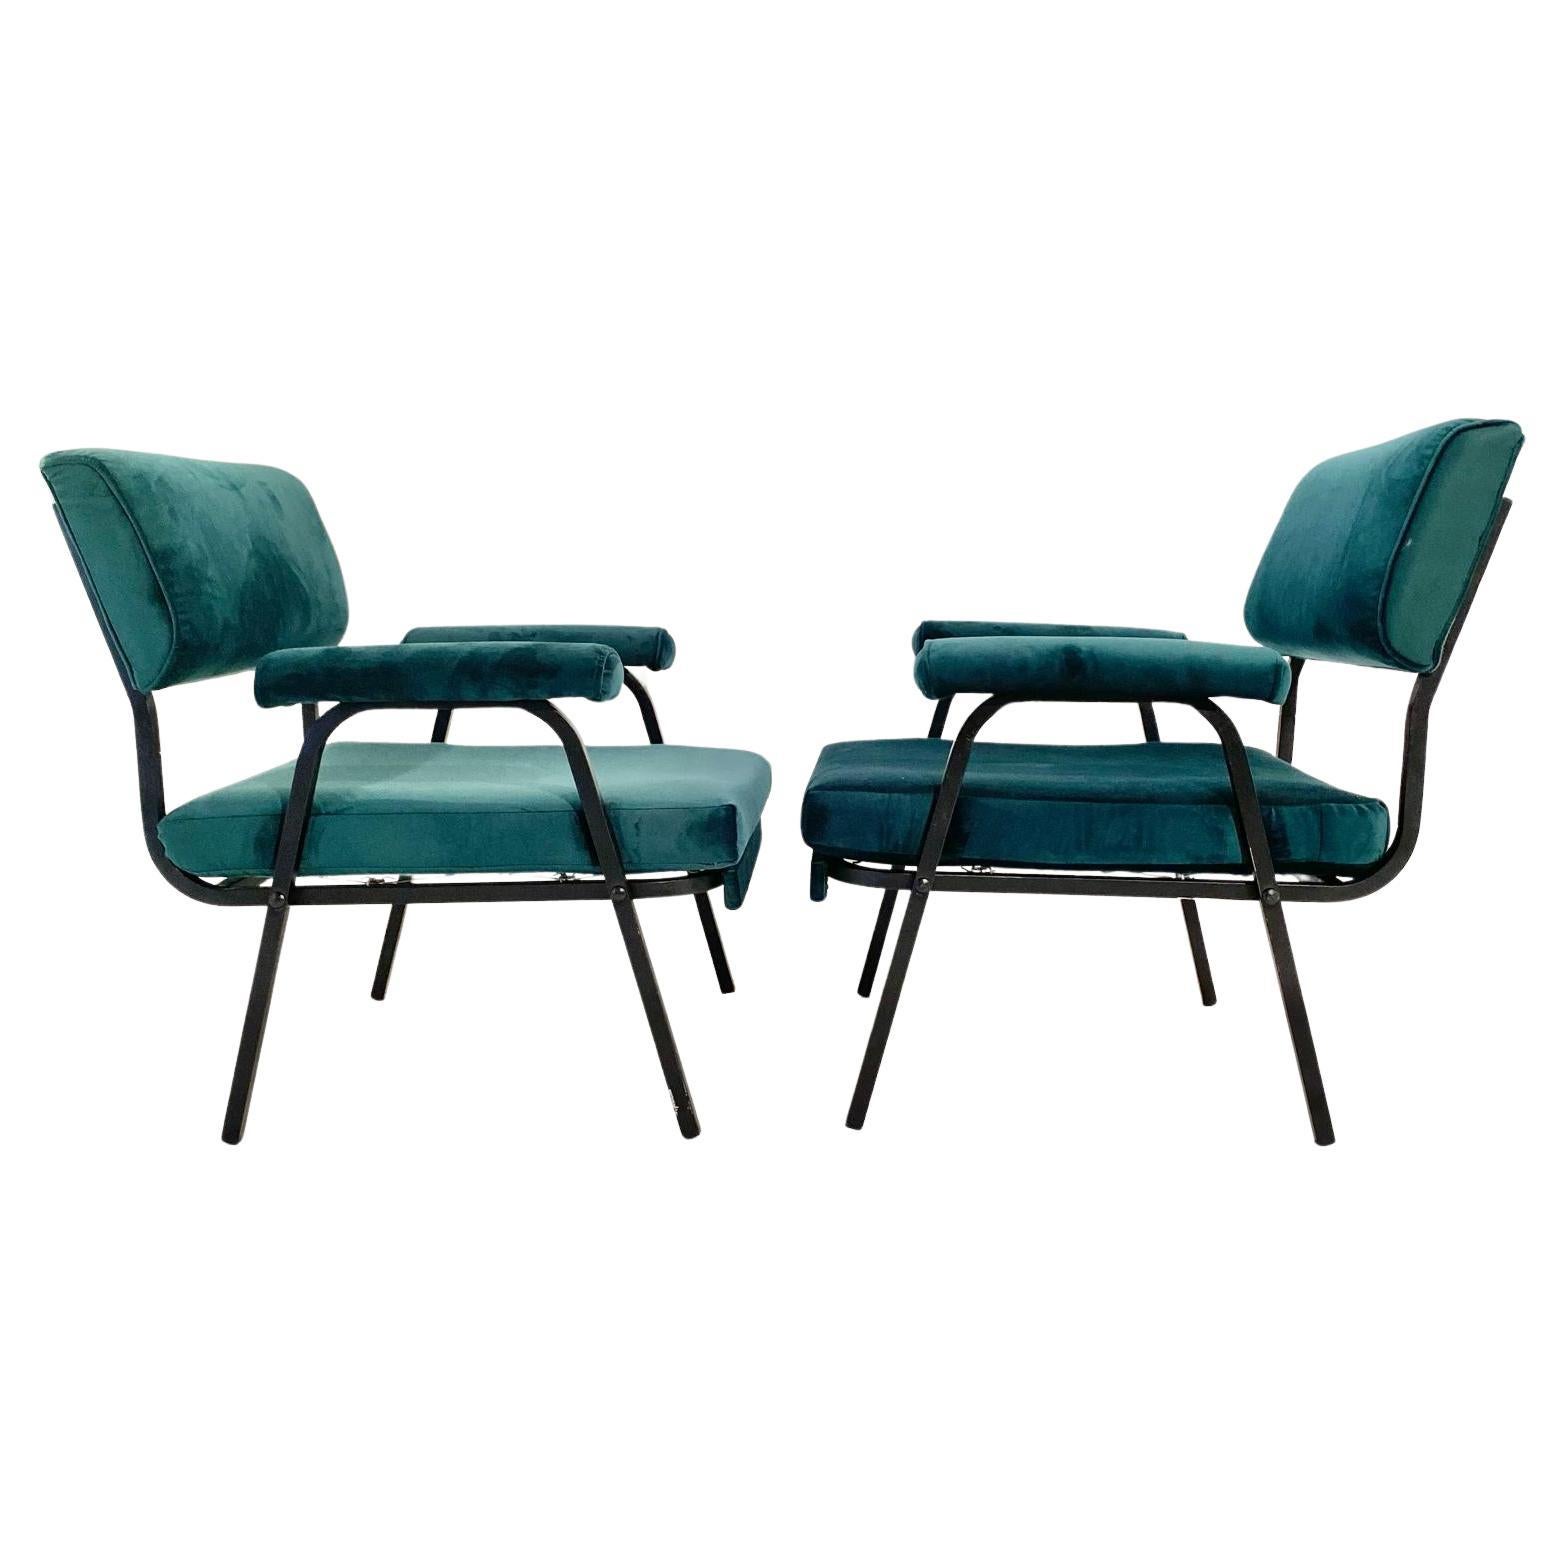 Vintage green armchairs, set of two, Italy 1960s.
A set of two green armchairs manufactured in Italy in the 1960s. Fabric dark green cover and black painted iron structure. Typical mid-century design.

Original fabric. In really good